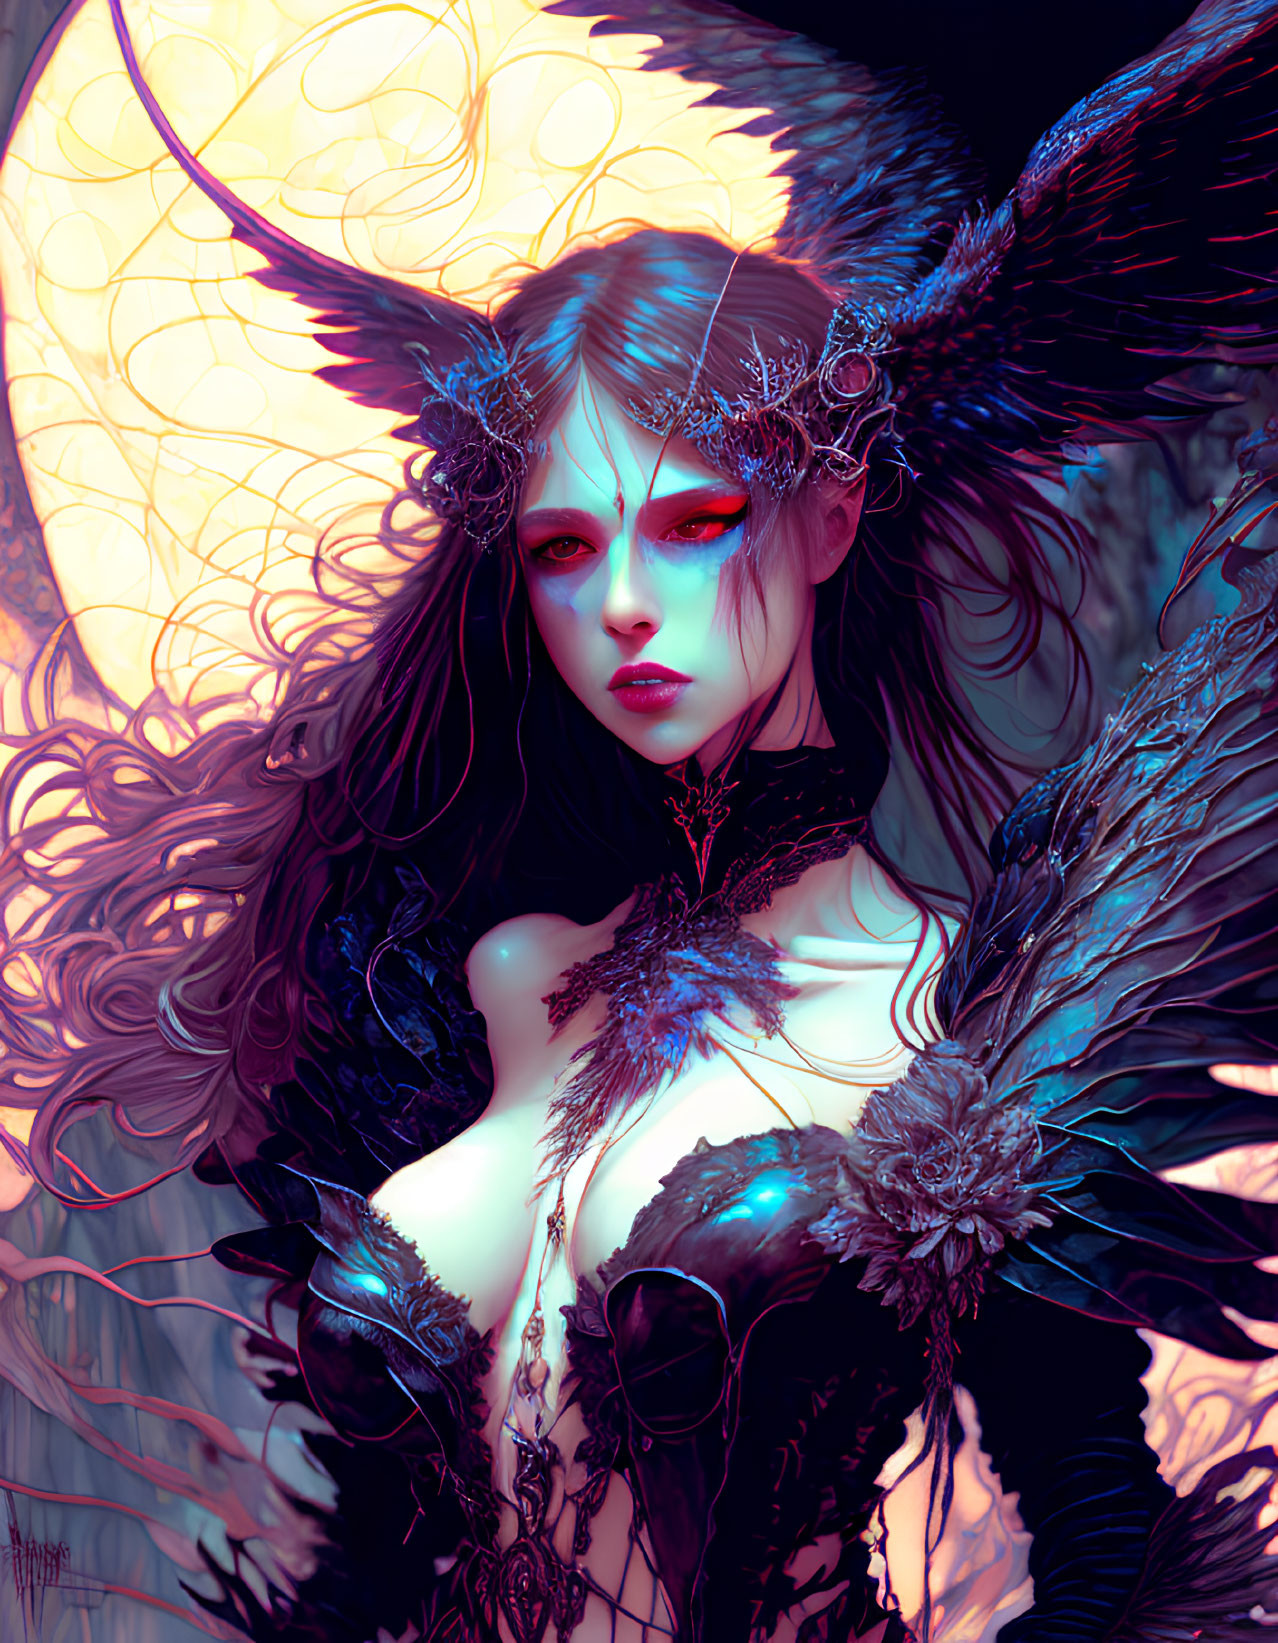 Fantastical female figure with ornate horns and dark wings in moonlit backdrop